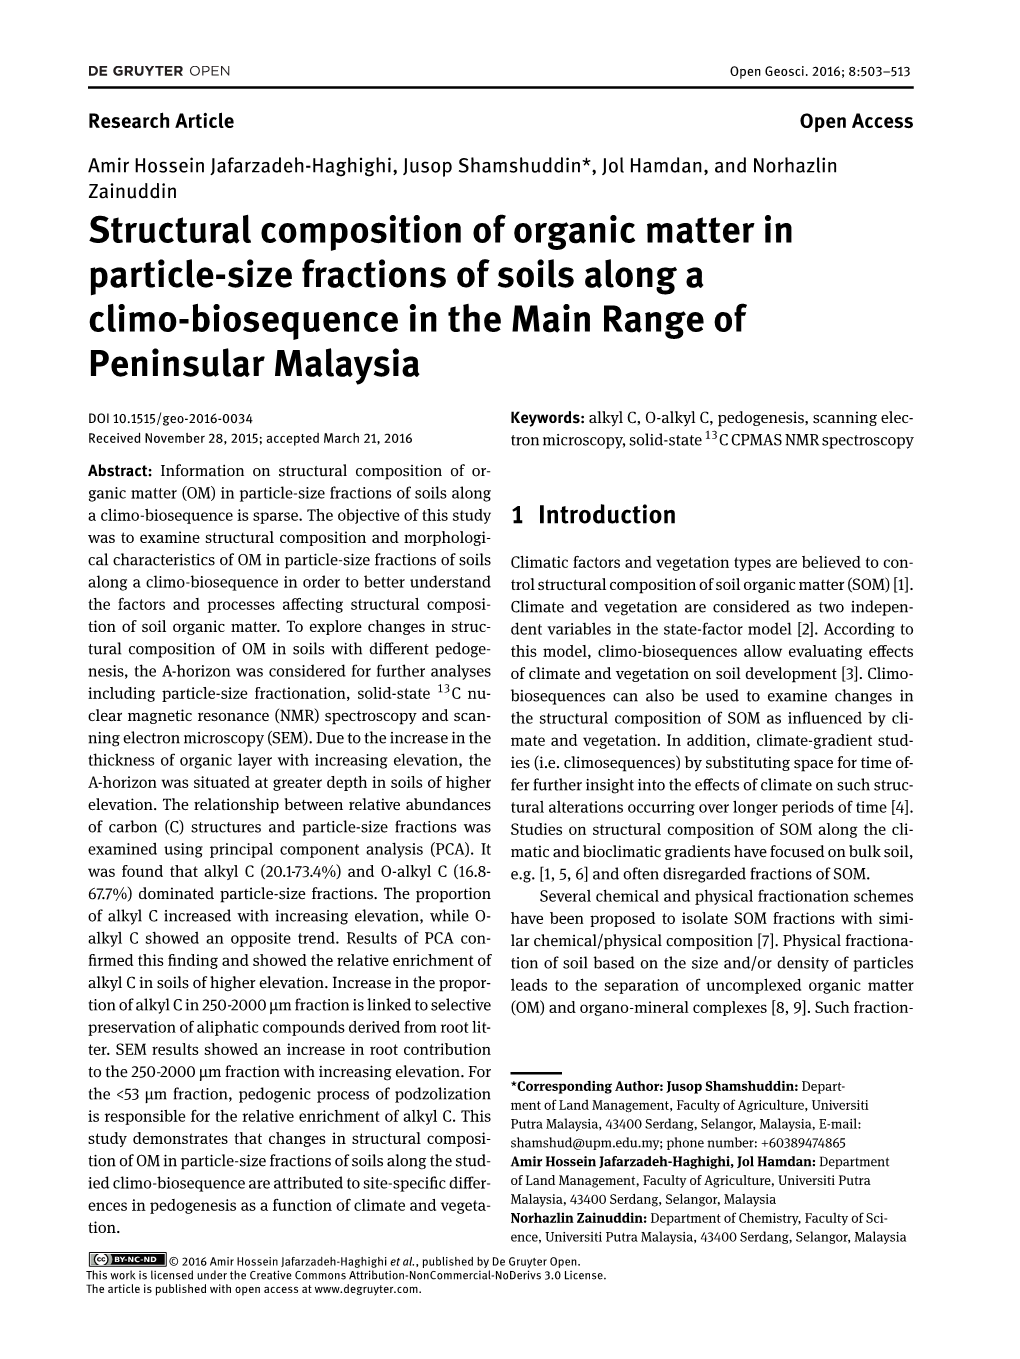 Structural Composition of Organic Matter in Particle-Size Fractions of Soils Along a Climo-Biosequence in the Main Range of Peninsular Malaysia